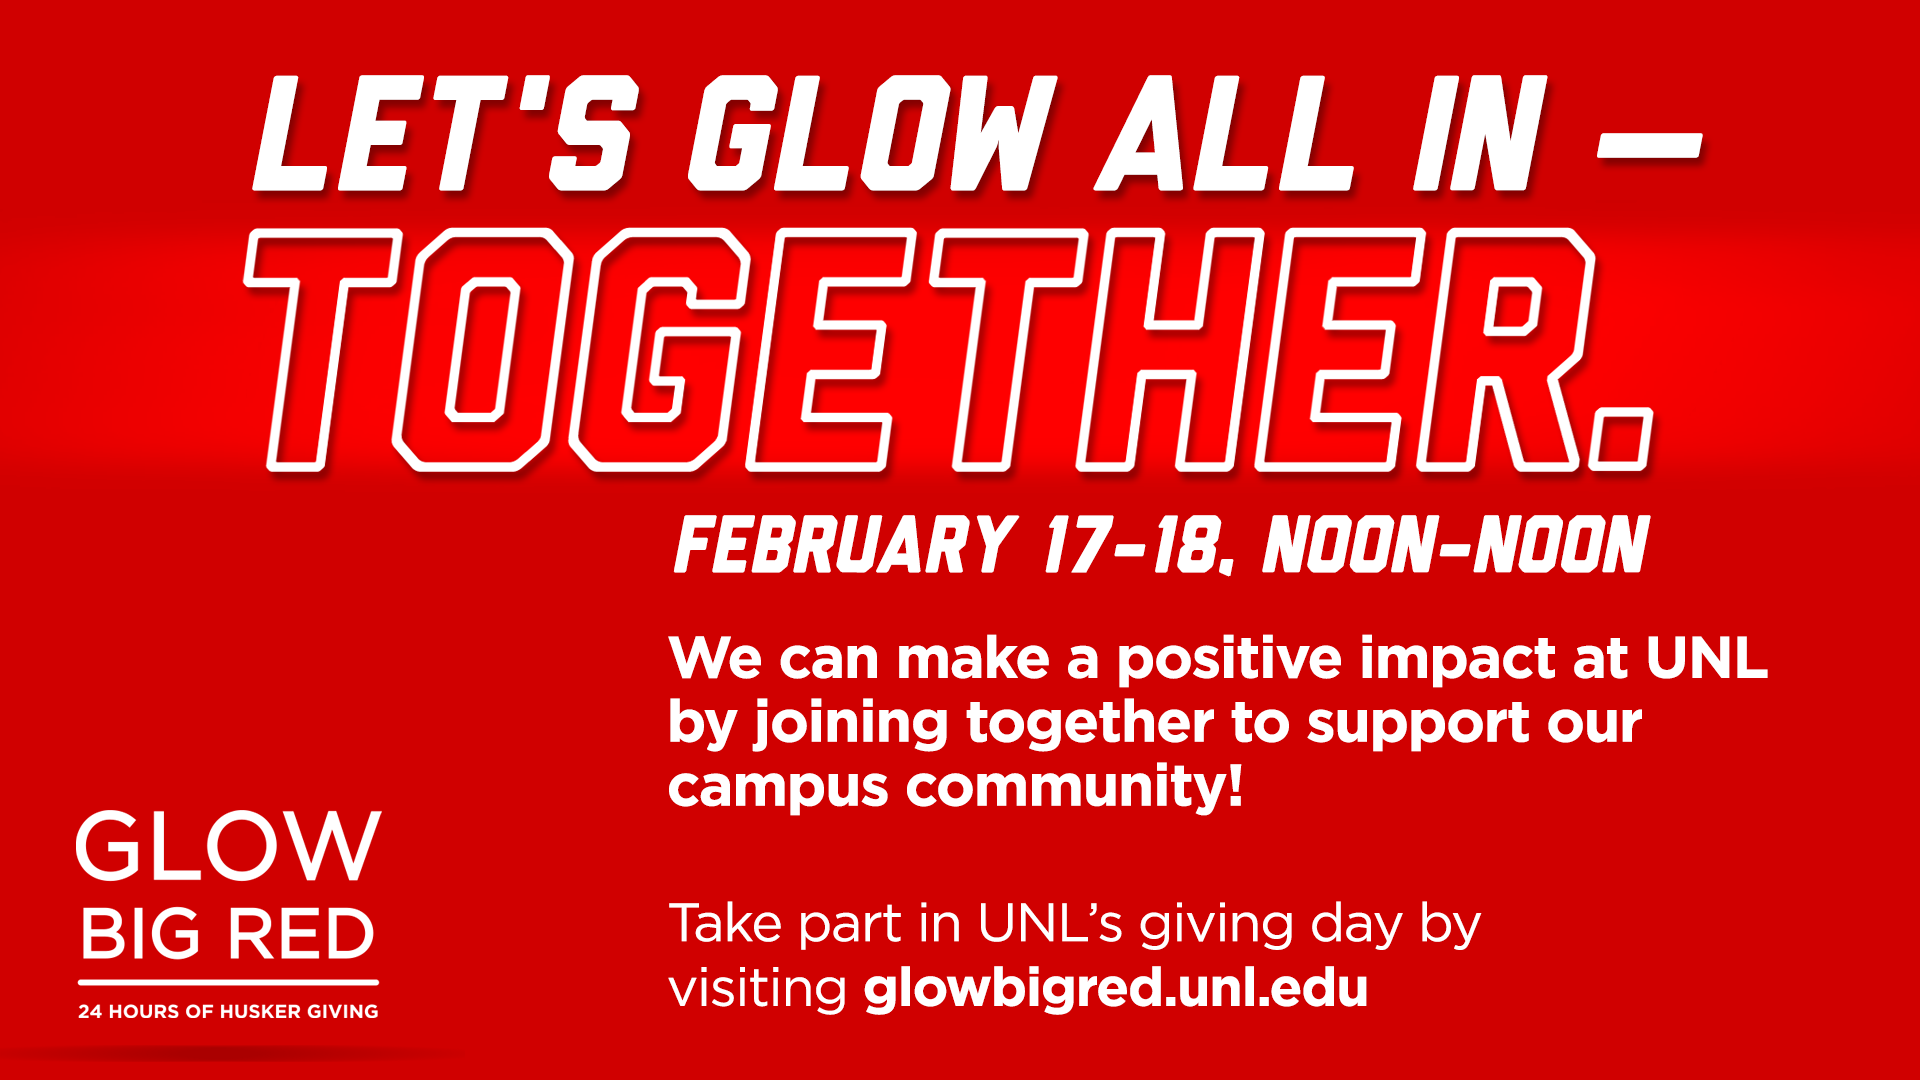 Glow Big Red Together!